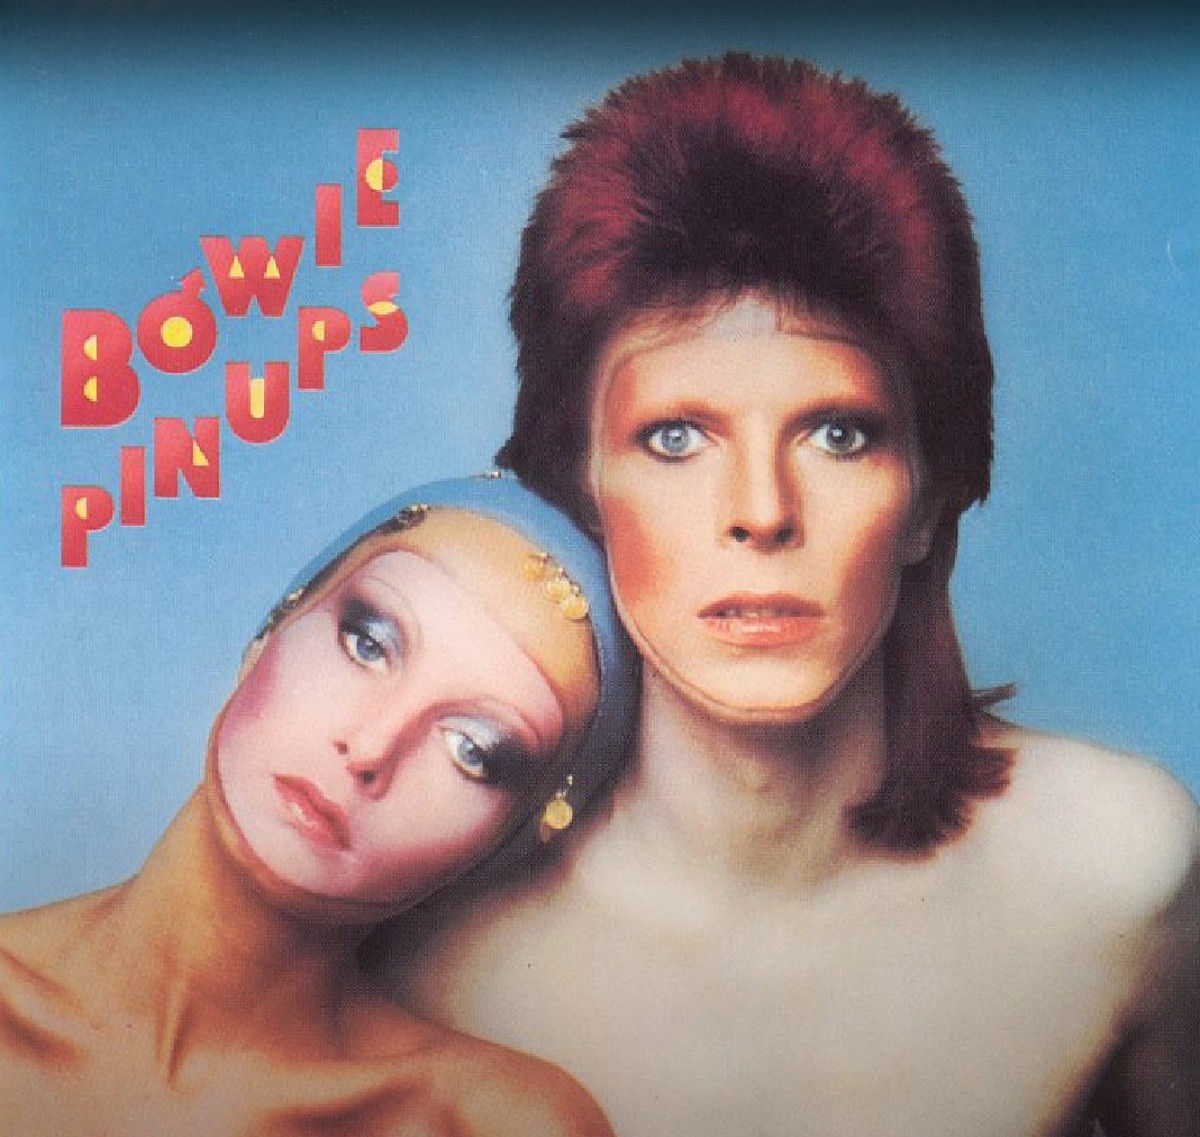 David Bowie's "Pin Ups" album cover